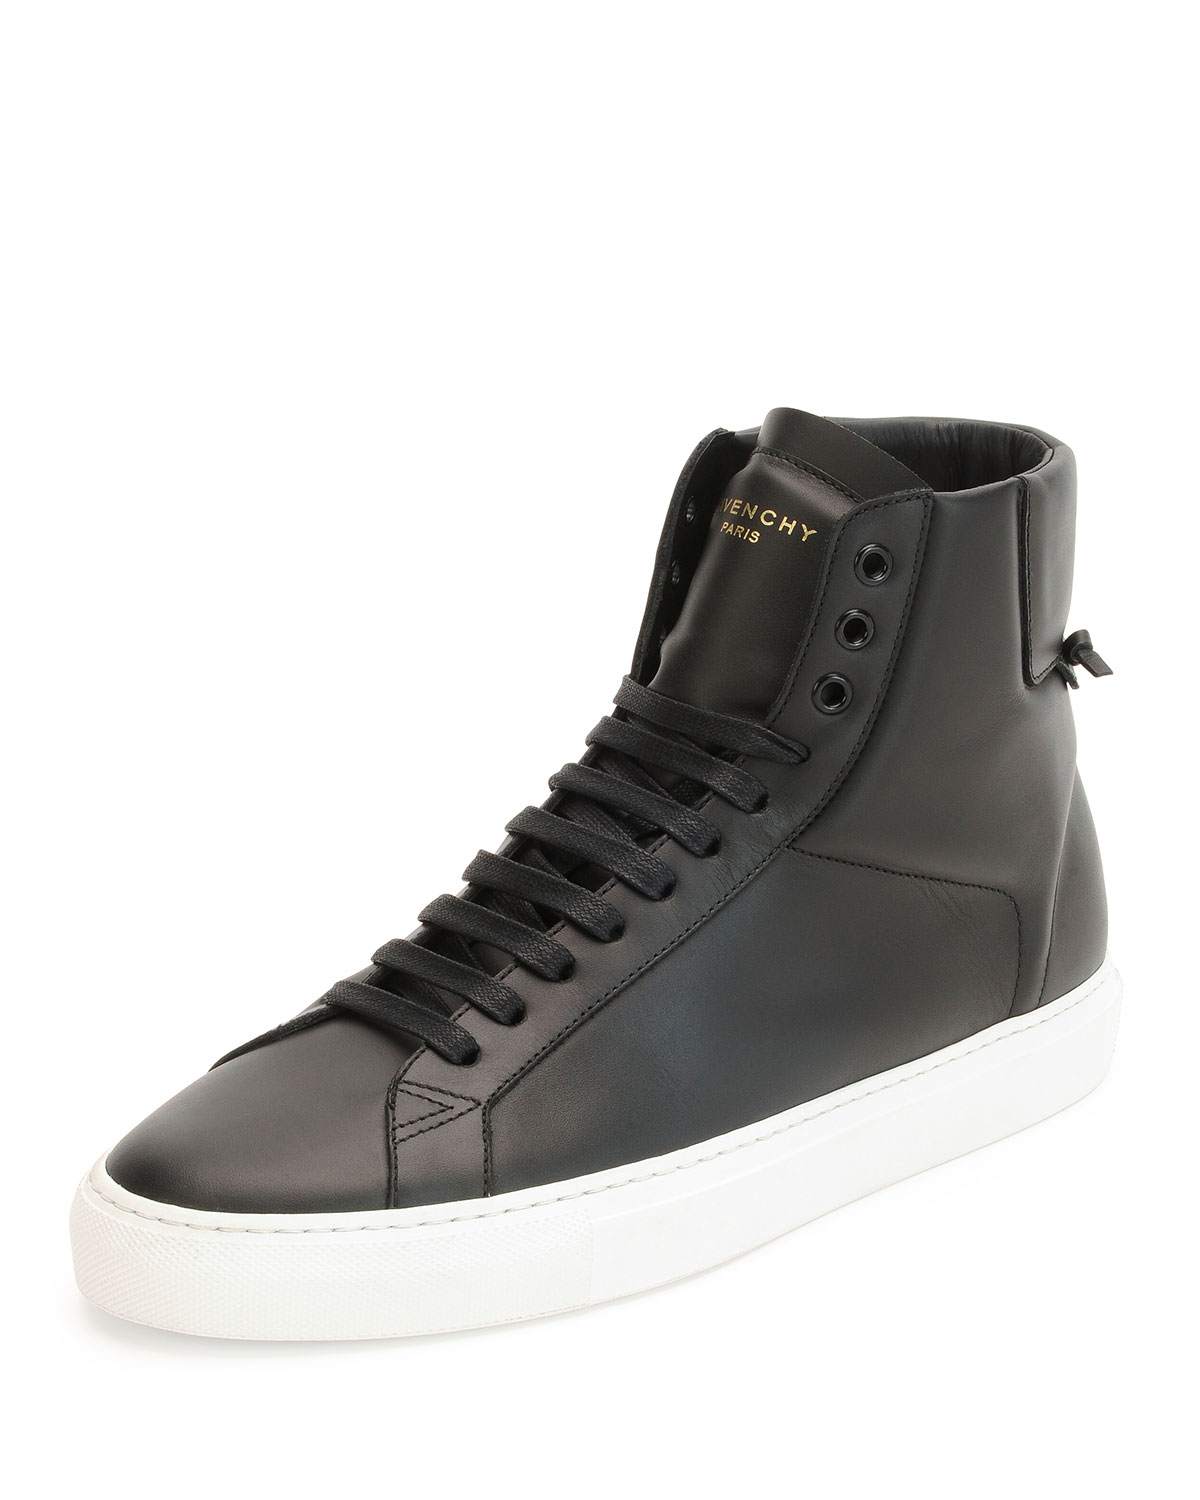 Givenchy Urban Street High-top Sneaker in White - Lyst